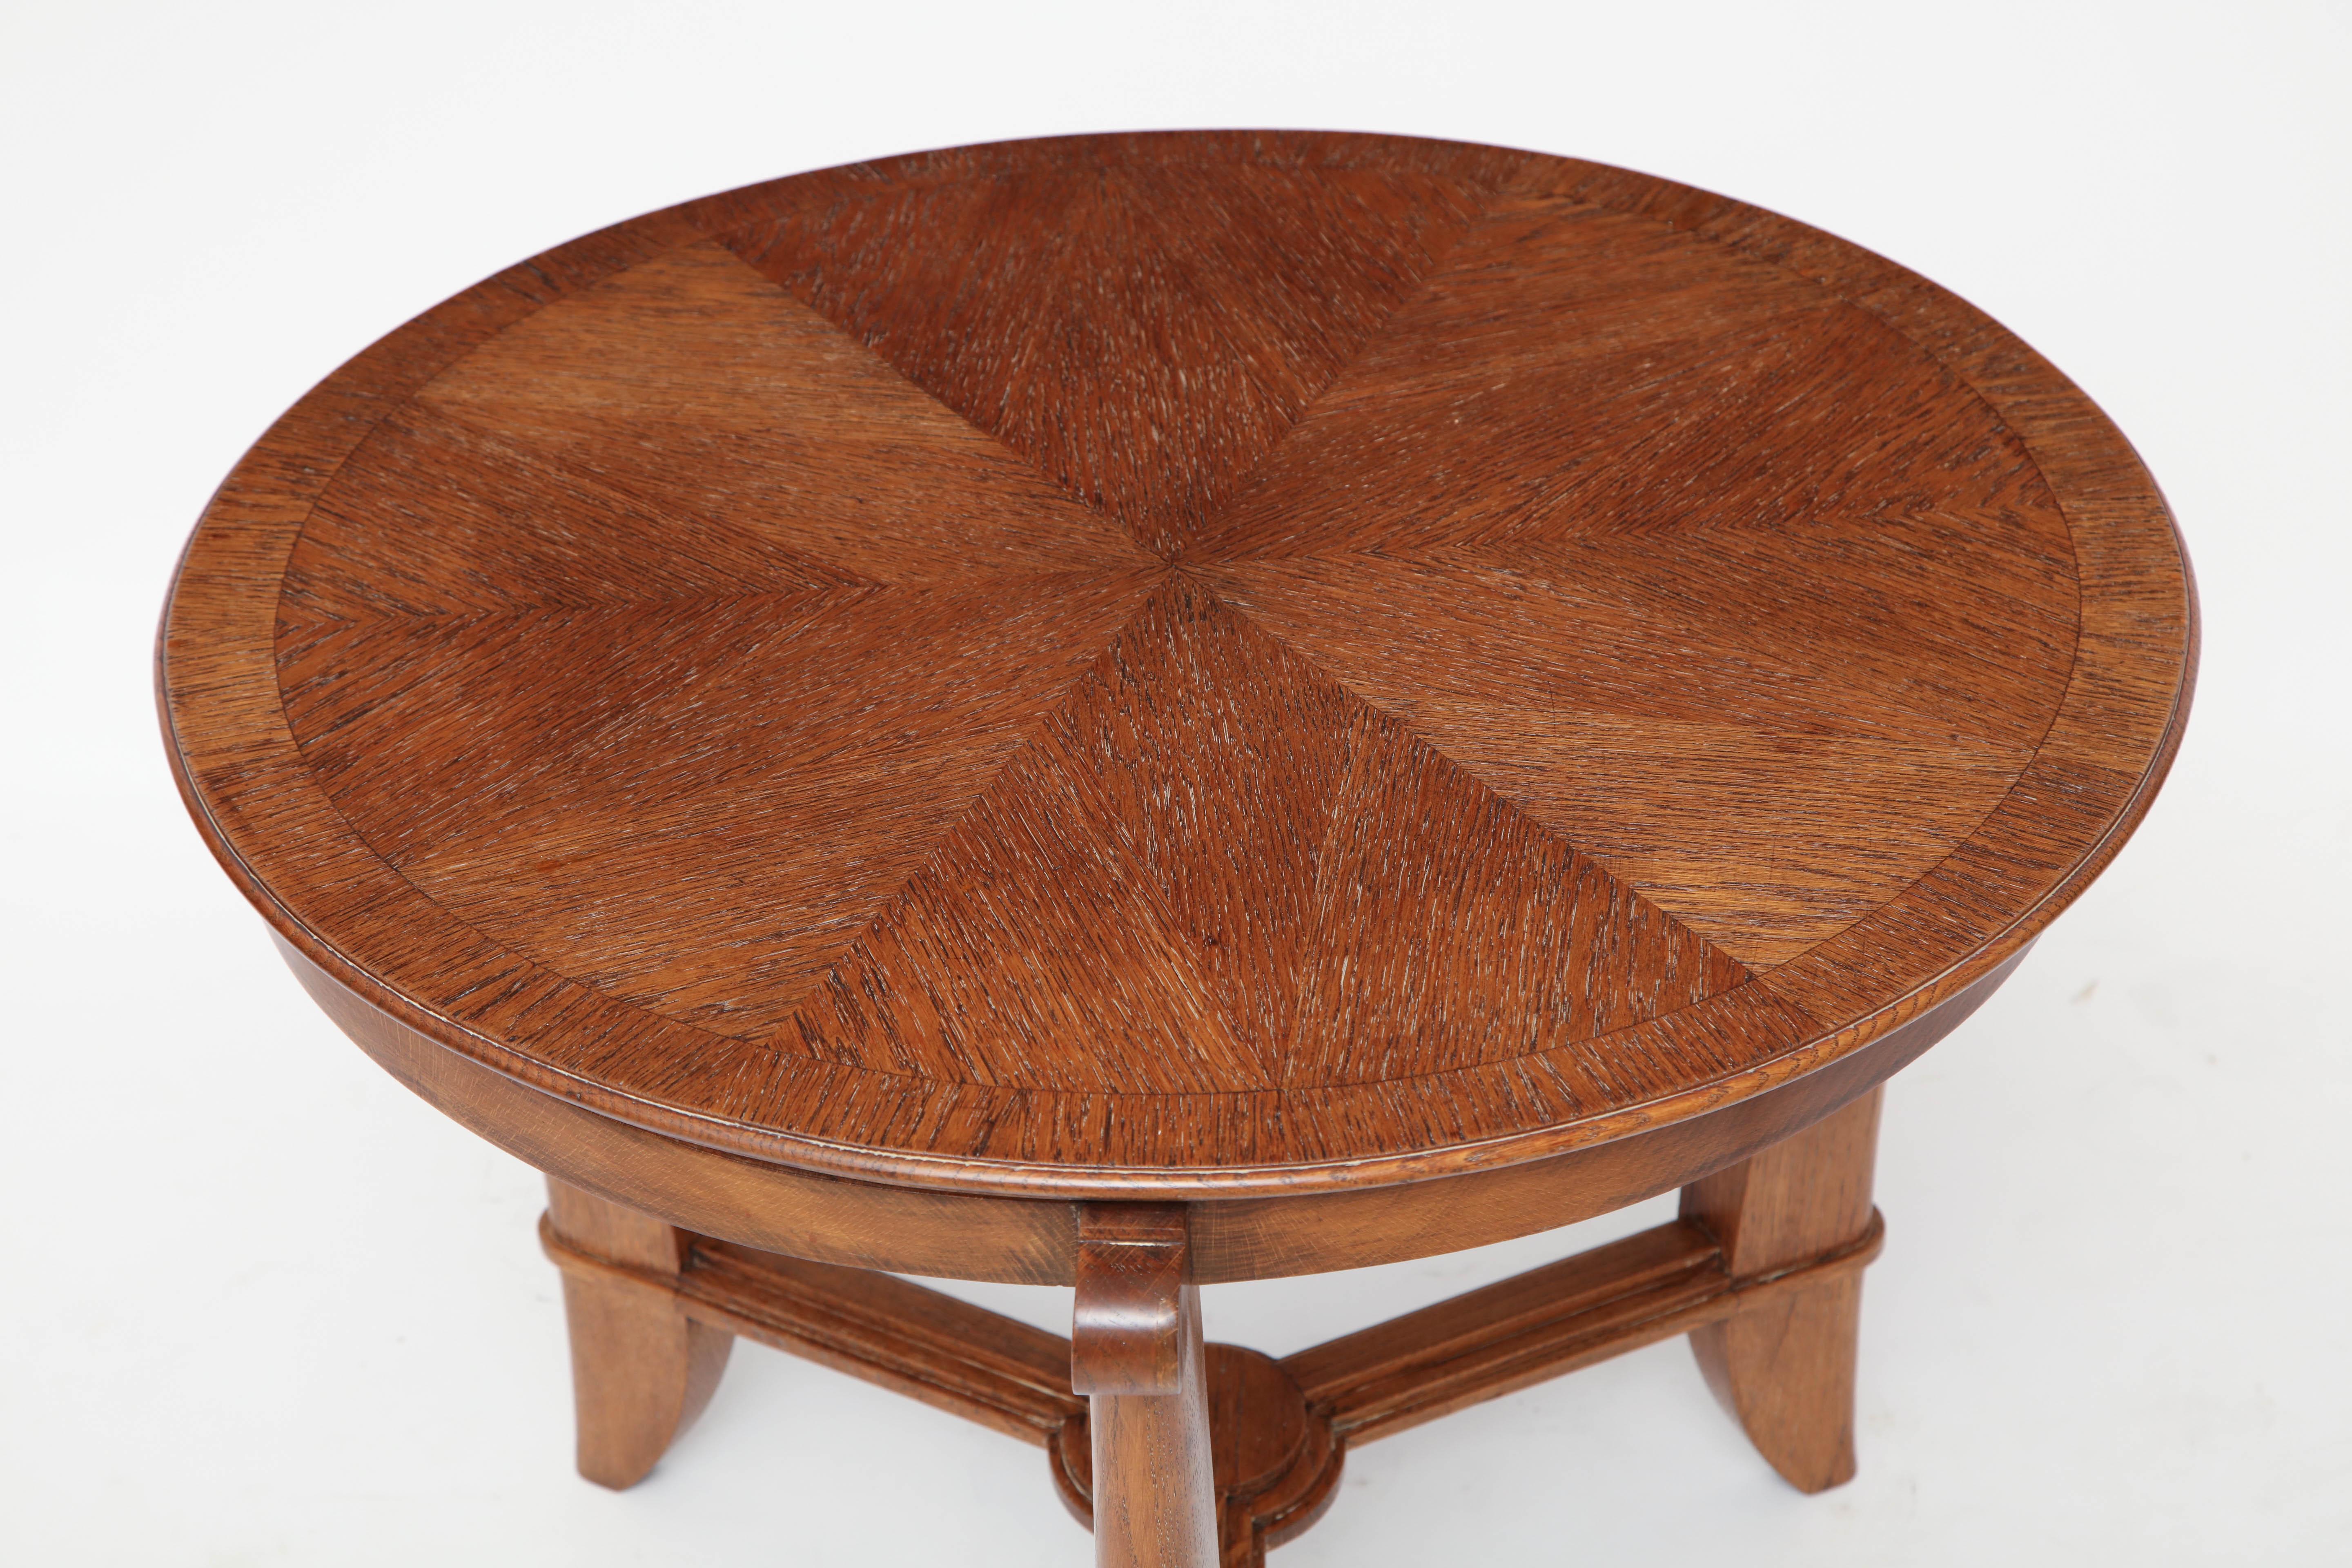 Circular oak table with three shaped legs joined by a stretcher, France, circa 1940.

Overall dimensions: 27.75” diameter, 21.5” height



Available to see in our NYC Showroom 
BK Antiques
306 East 61st St. 2nd fl.
New York, NY 10065